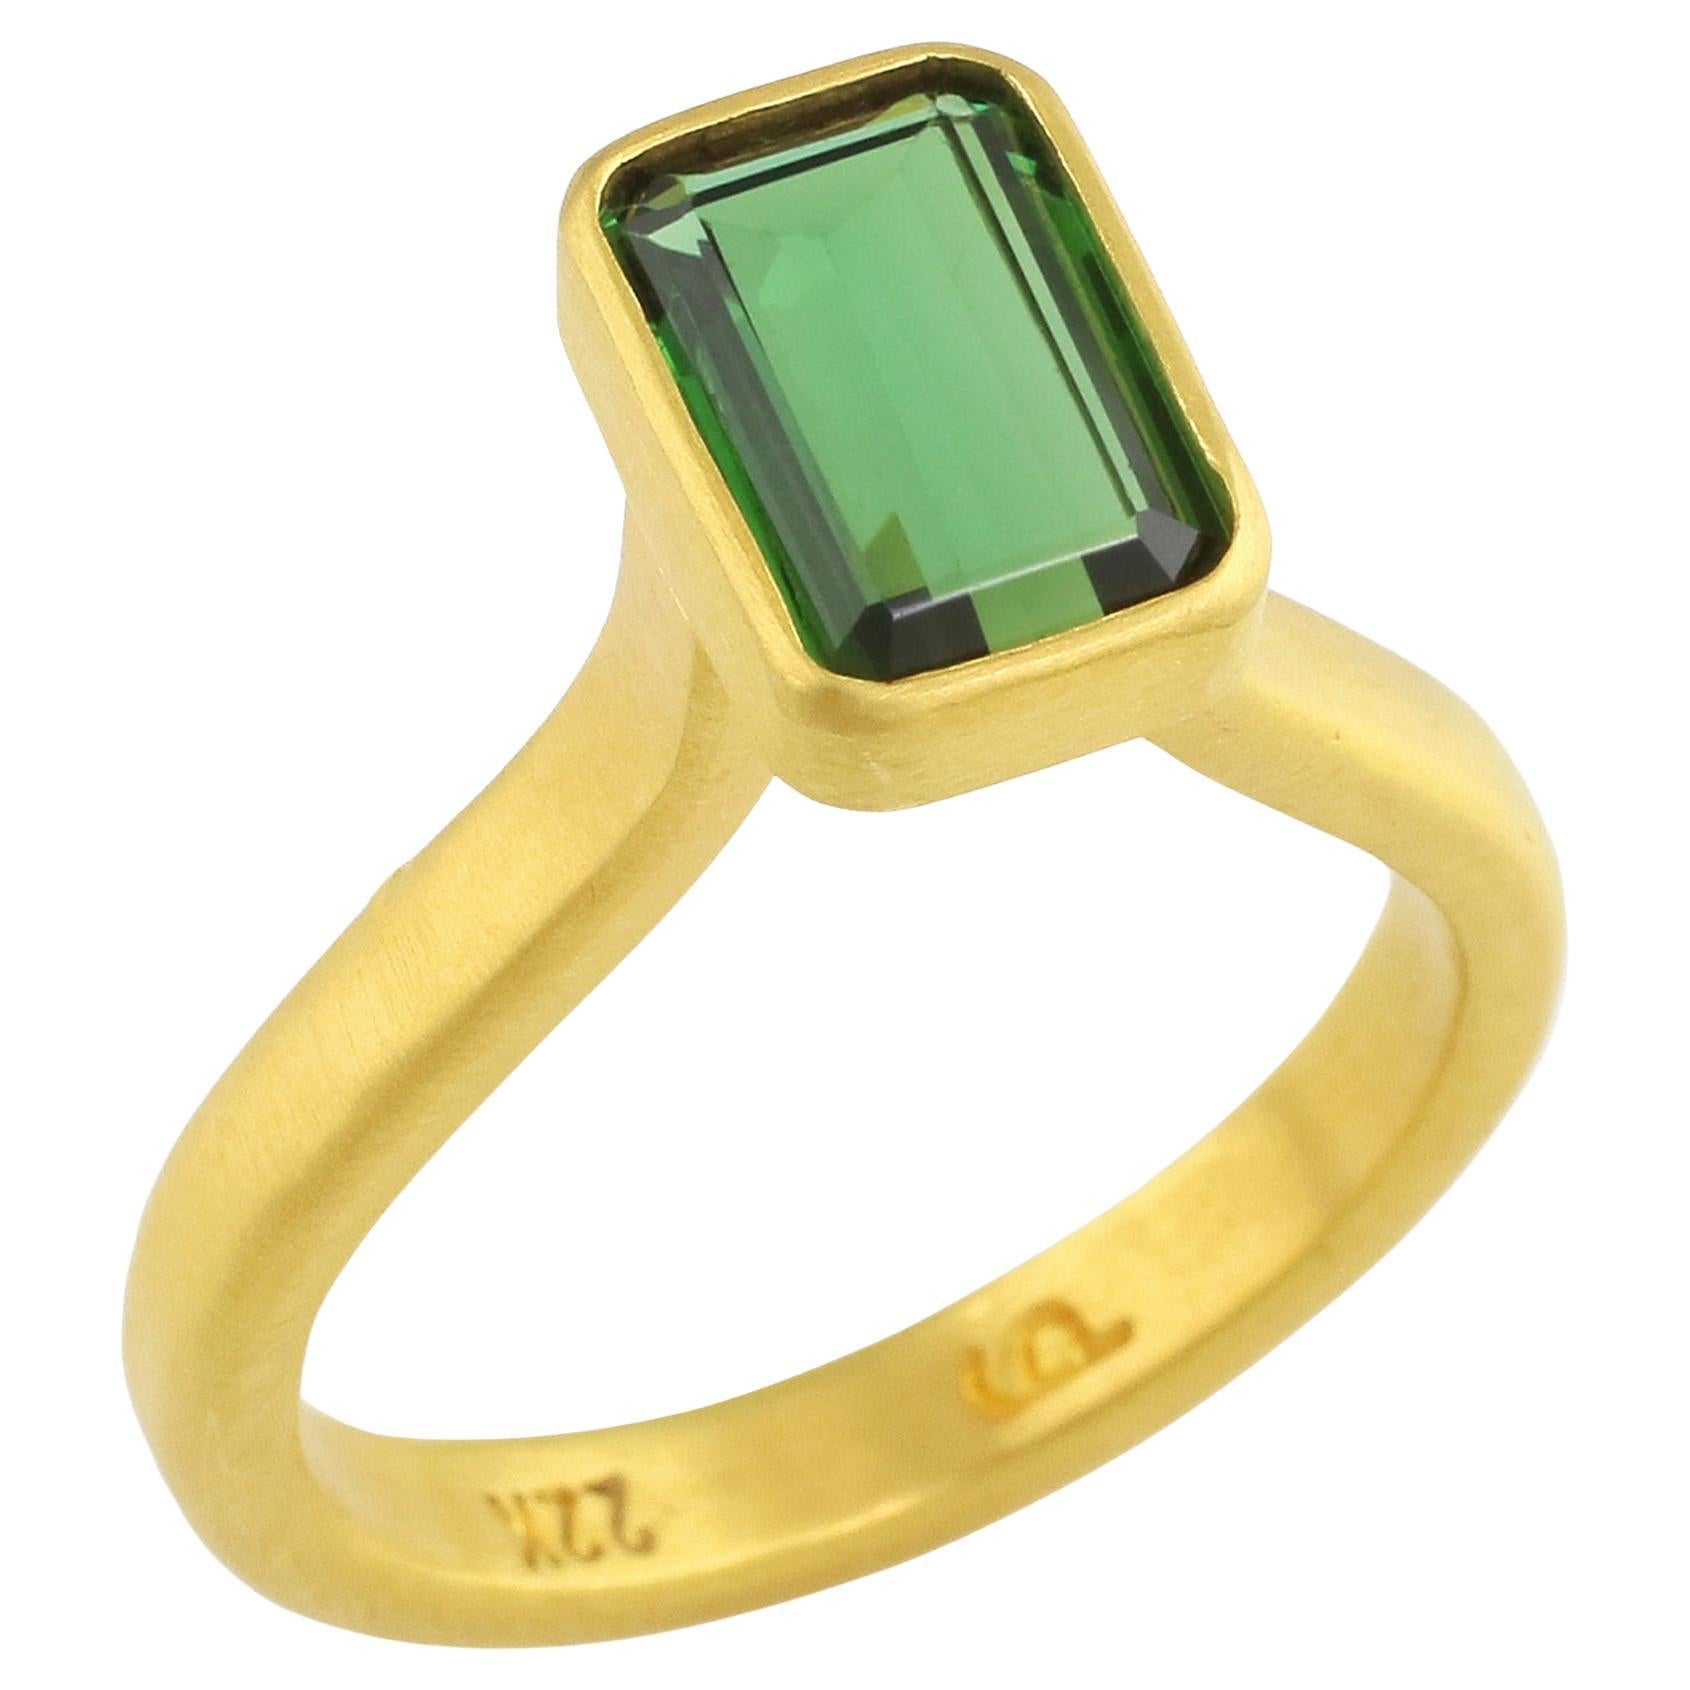 PHILIPPE SPENCER 1.7 Ct. Extra-Fine Tourmaline Statement Ring in 22K Gold